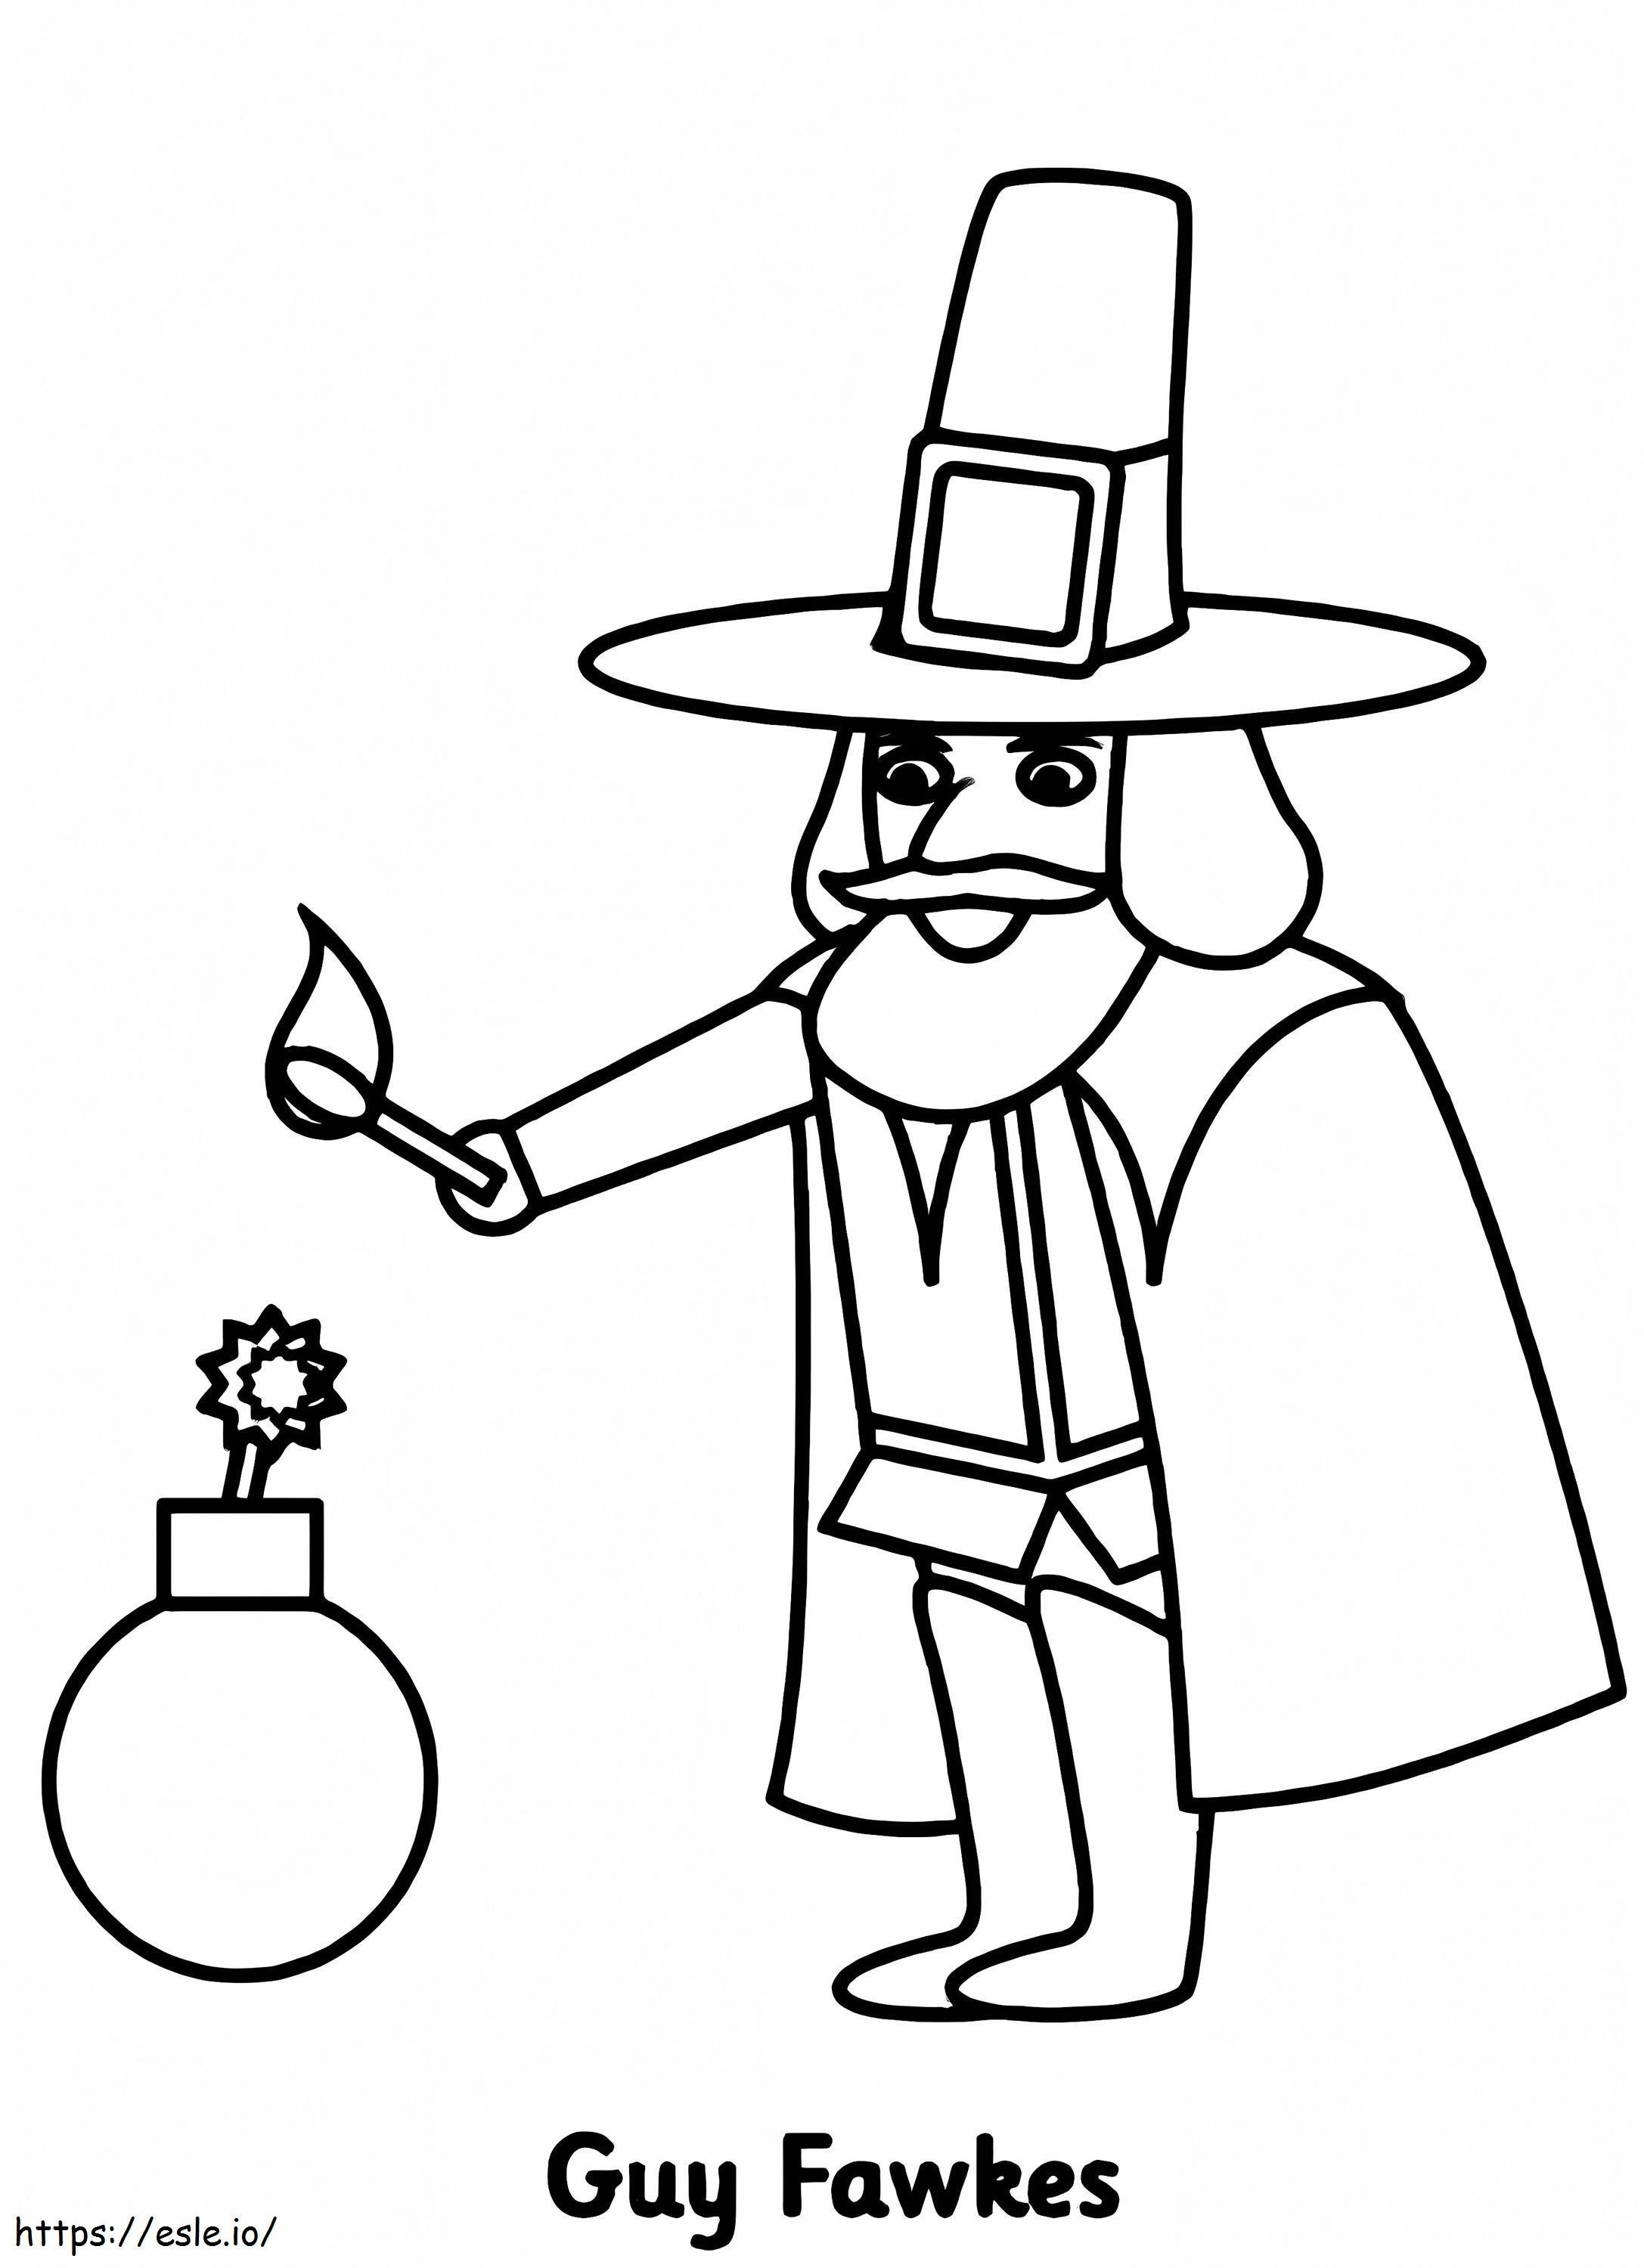 Guy Fawkes 5 coloring page